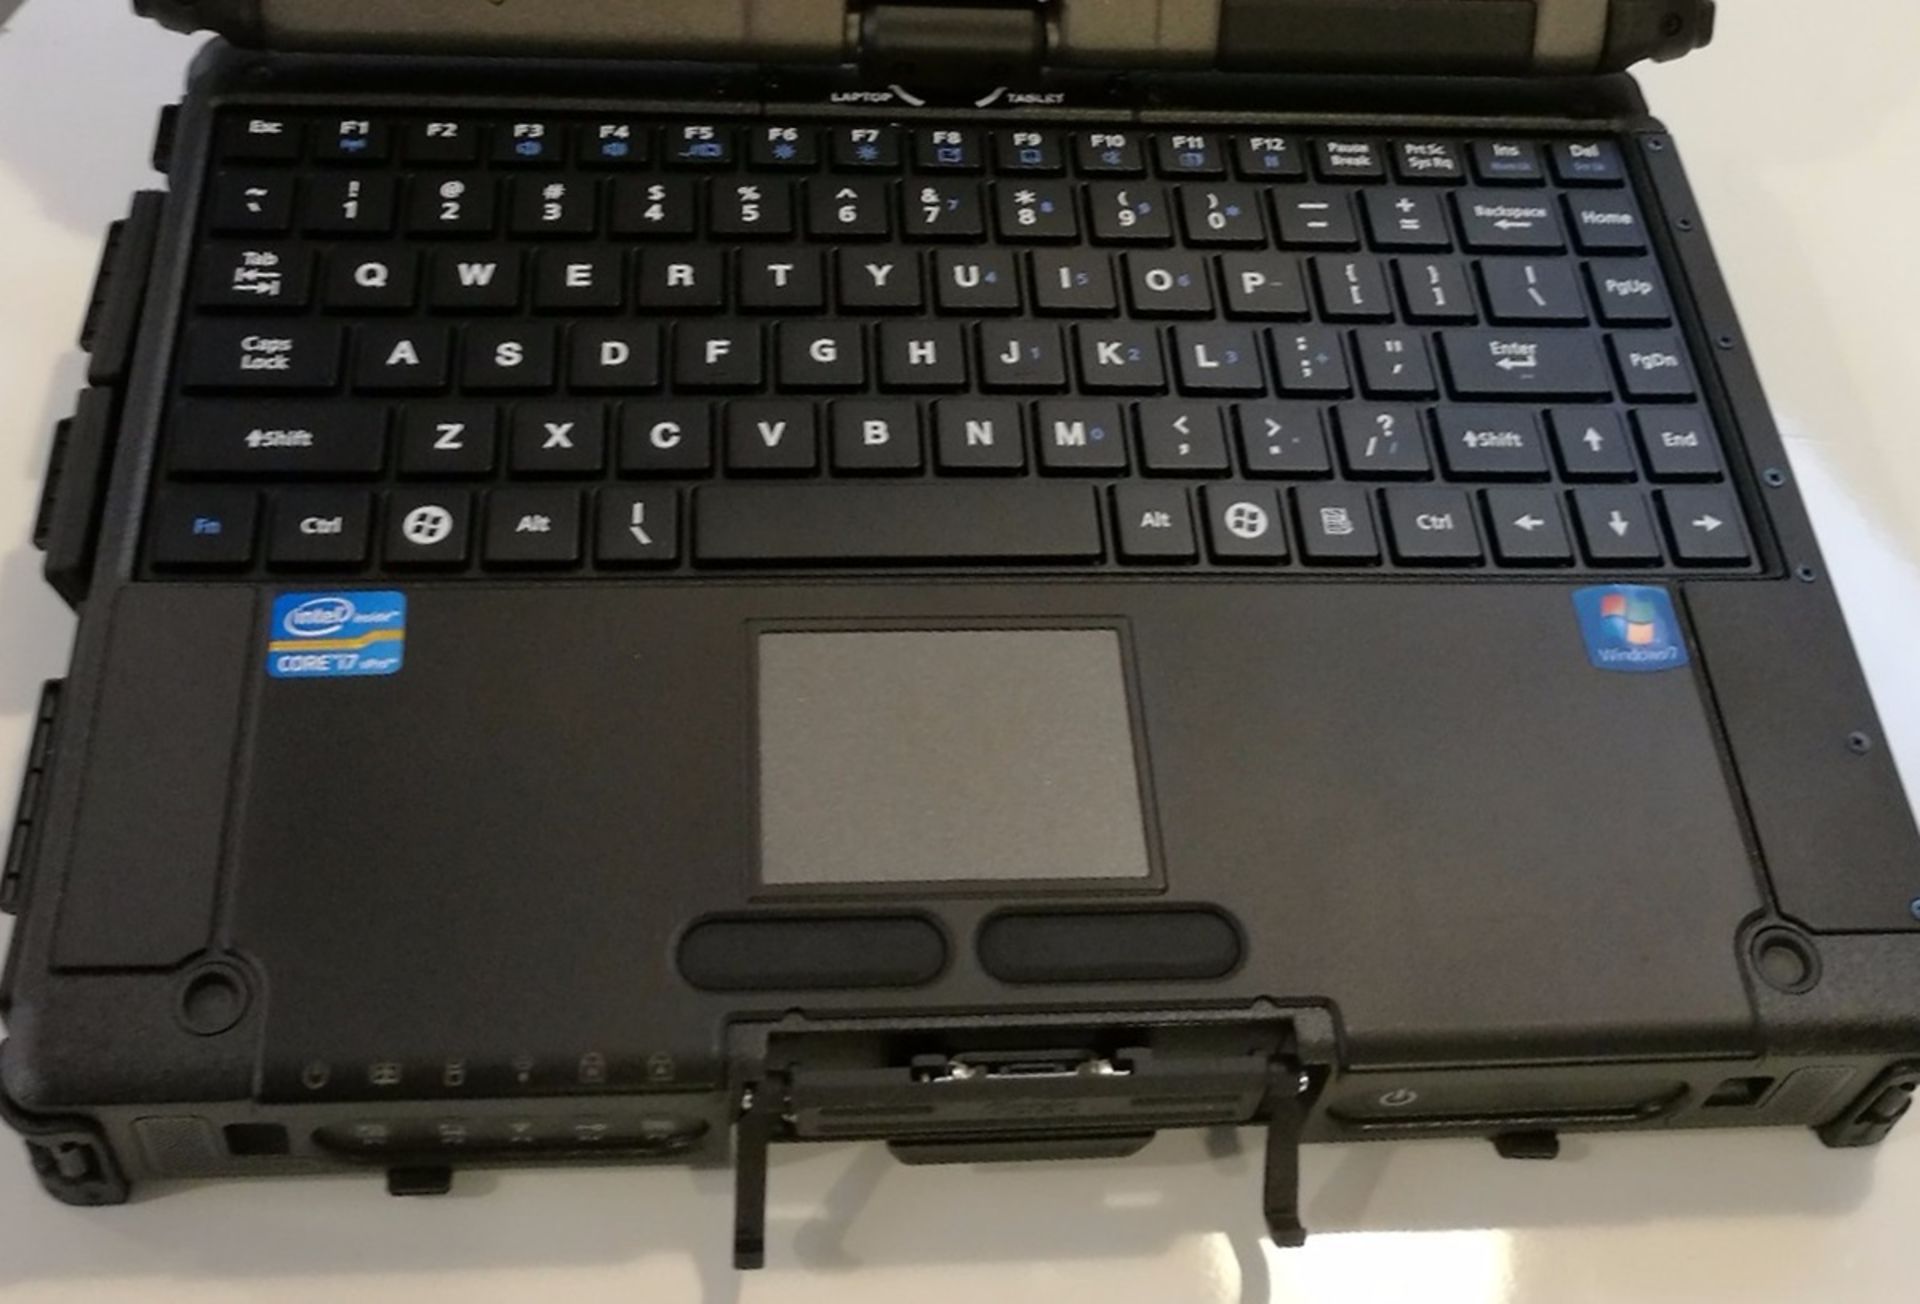 1 x Getac V200 Rugged Laptop Computer - Rugged Laptop That Transforms into a Tablet PC - Features an - Image 8 of 10